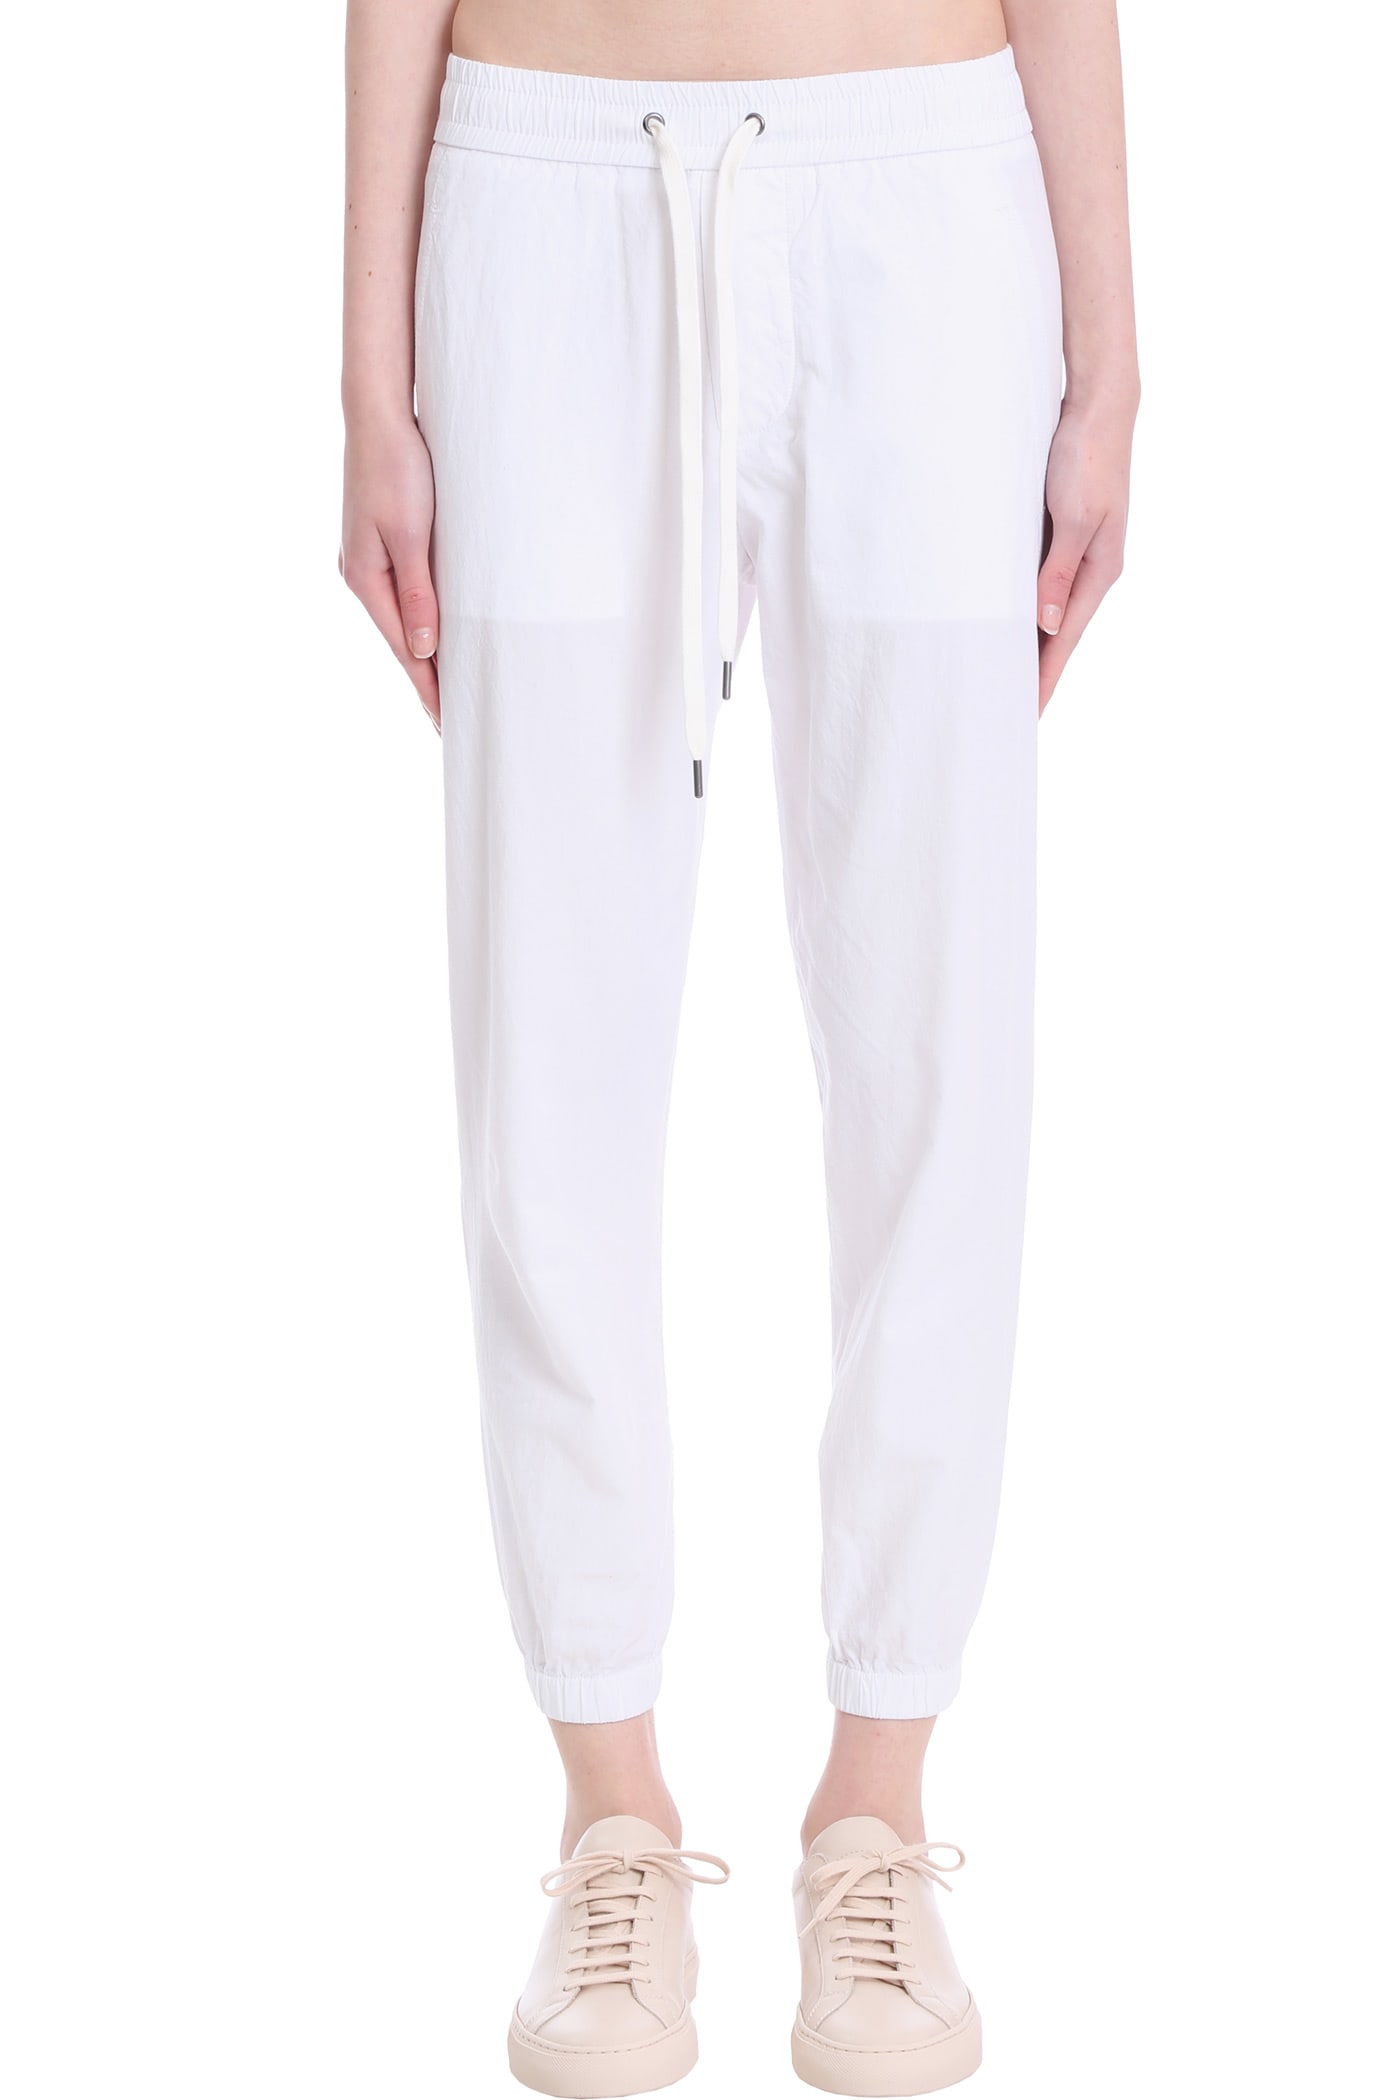 JAMES PERSE PANTS IN WHITE COTTON,WCFP1894